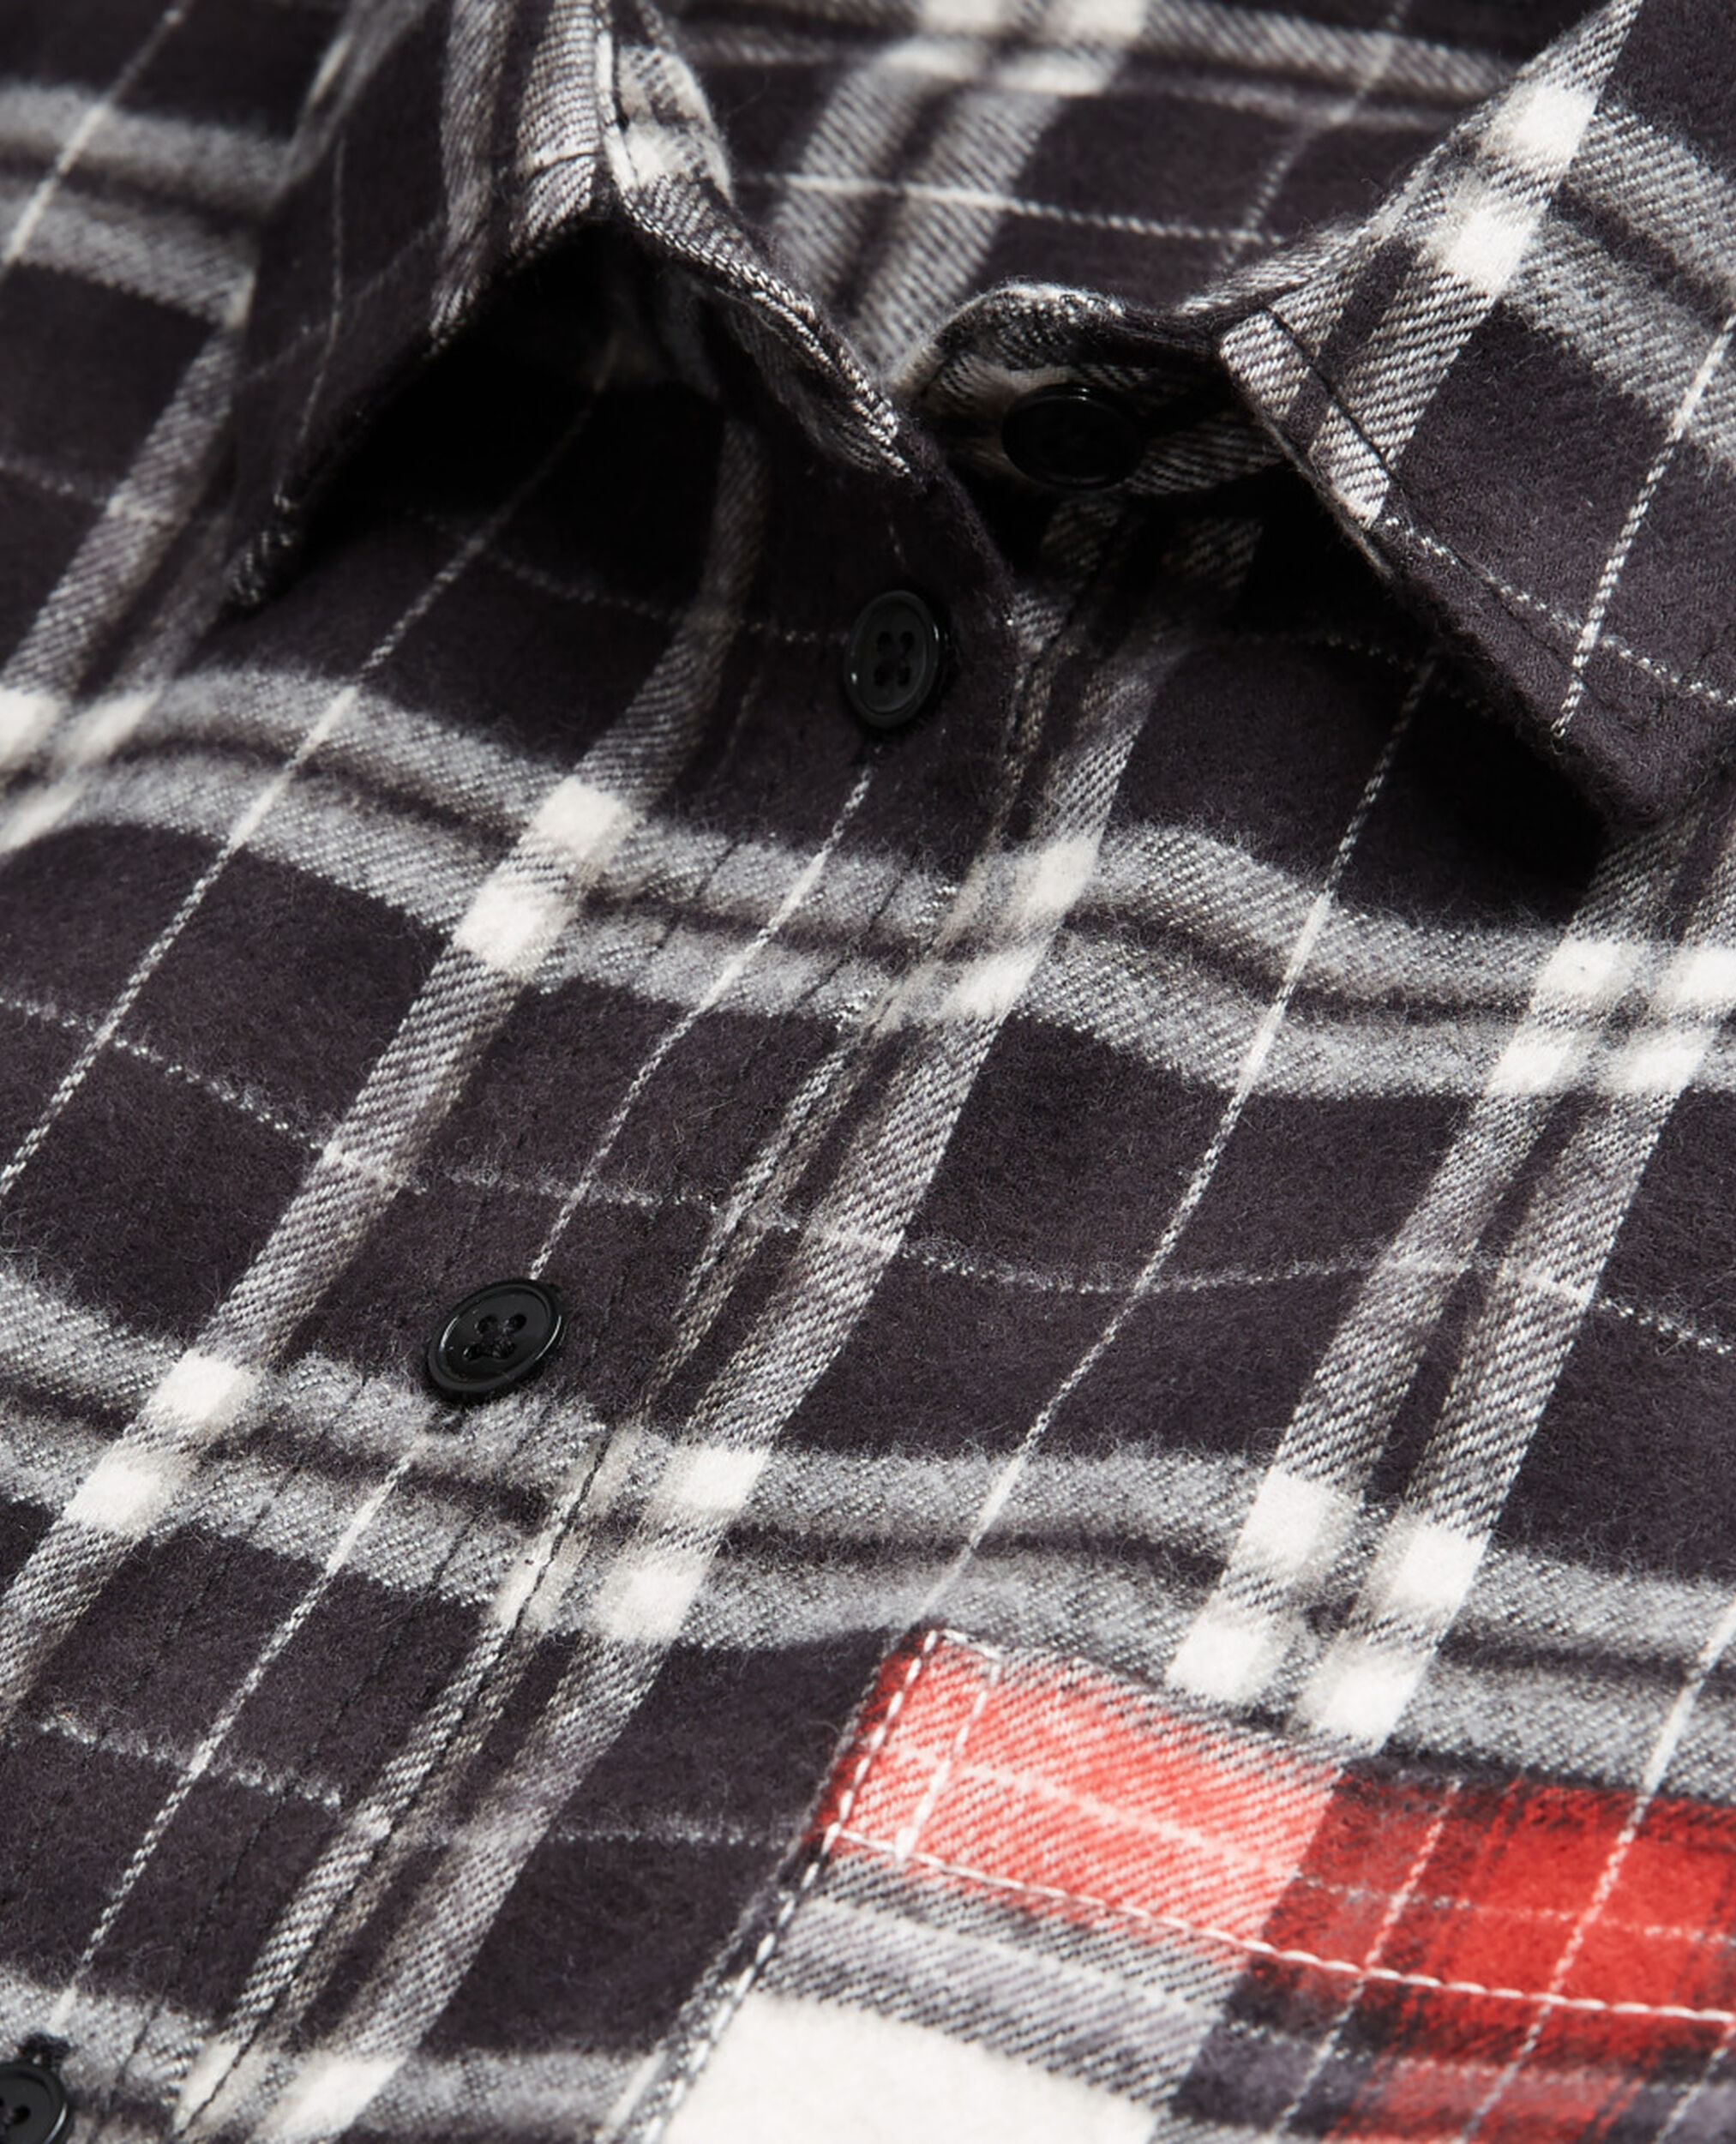 Overshirt with check motif, BLACK, hi-res image number null